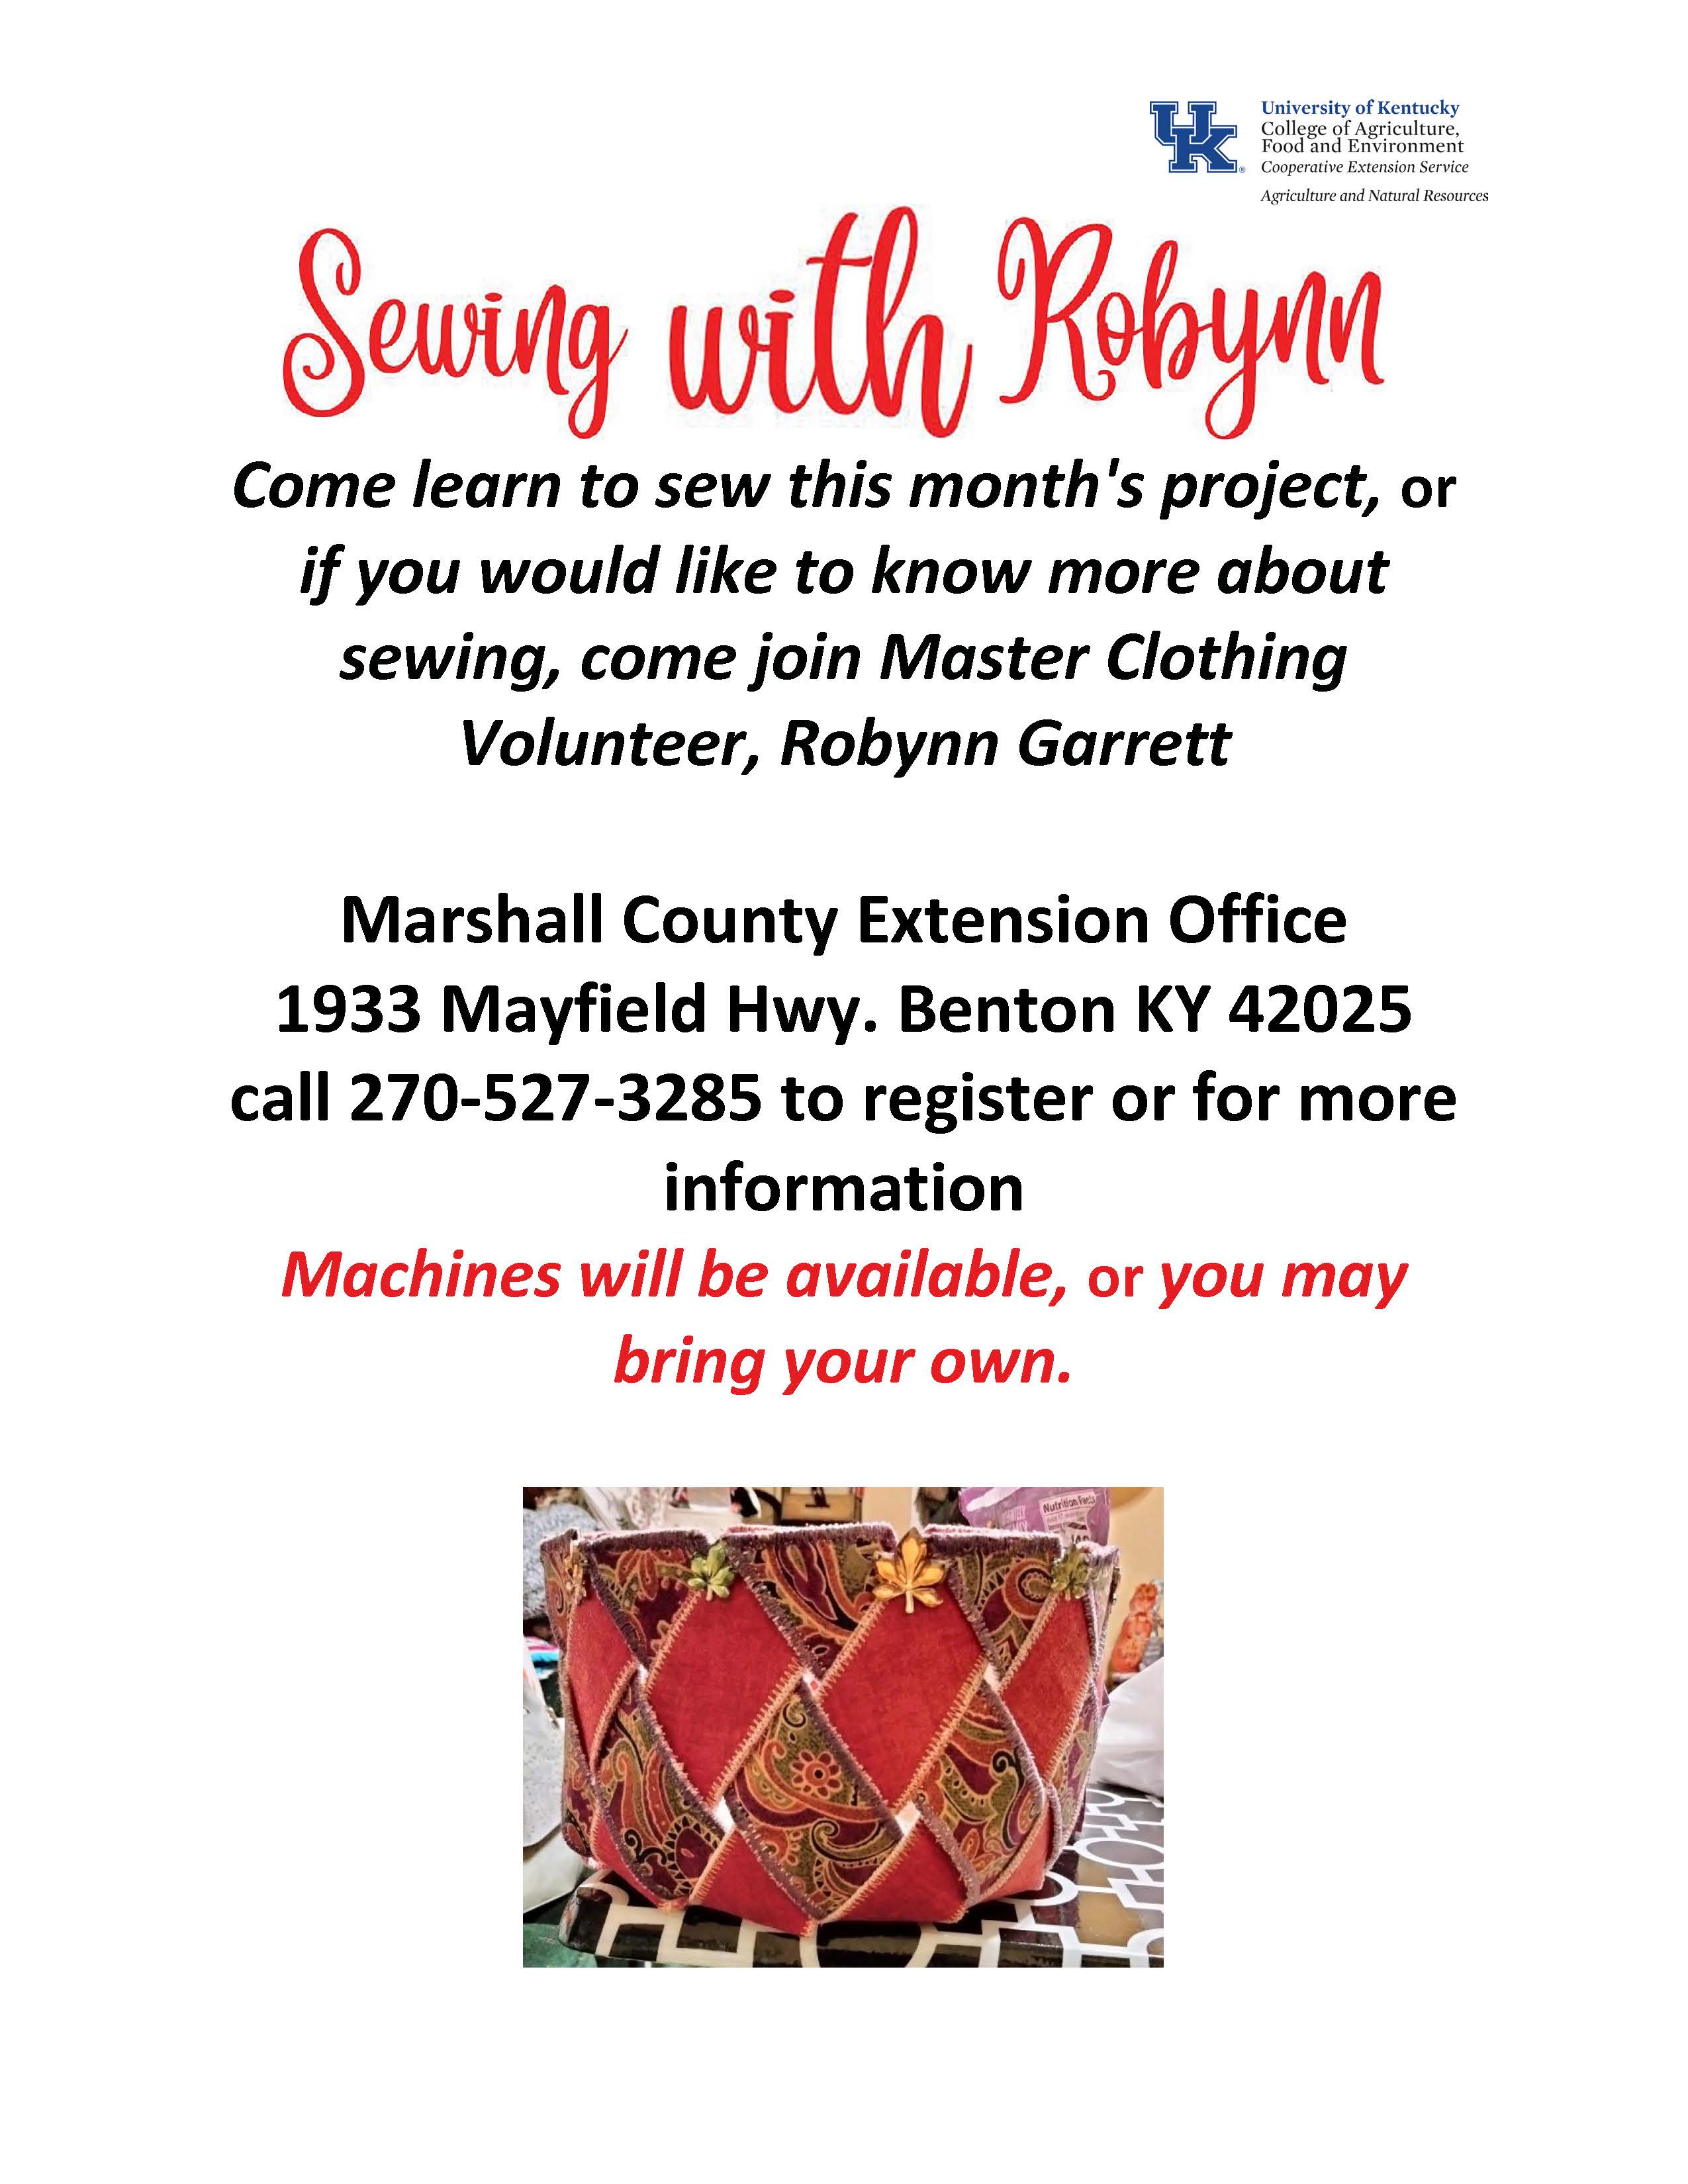 flyer for sewing class with a handmade cloth basket